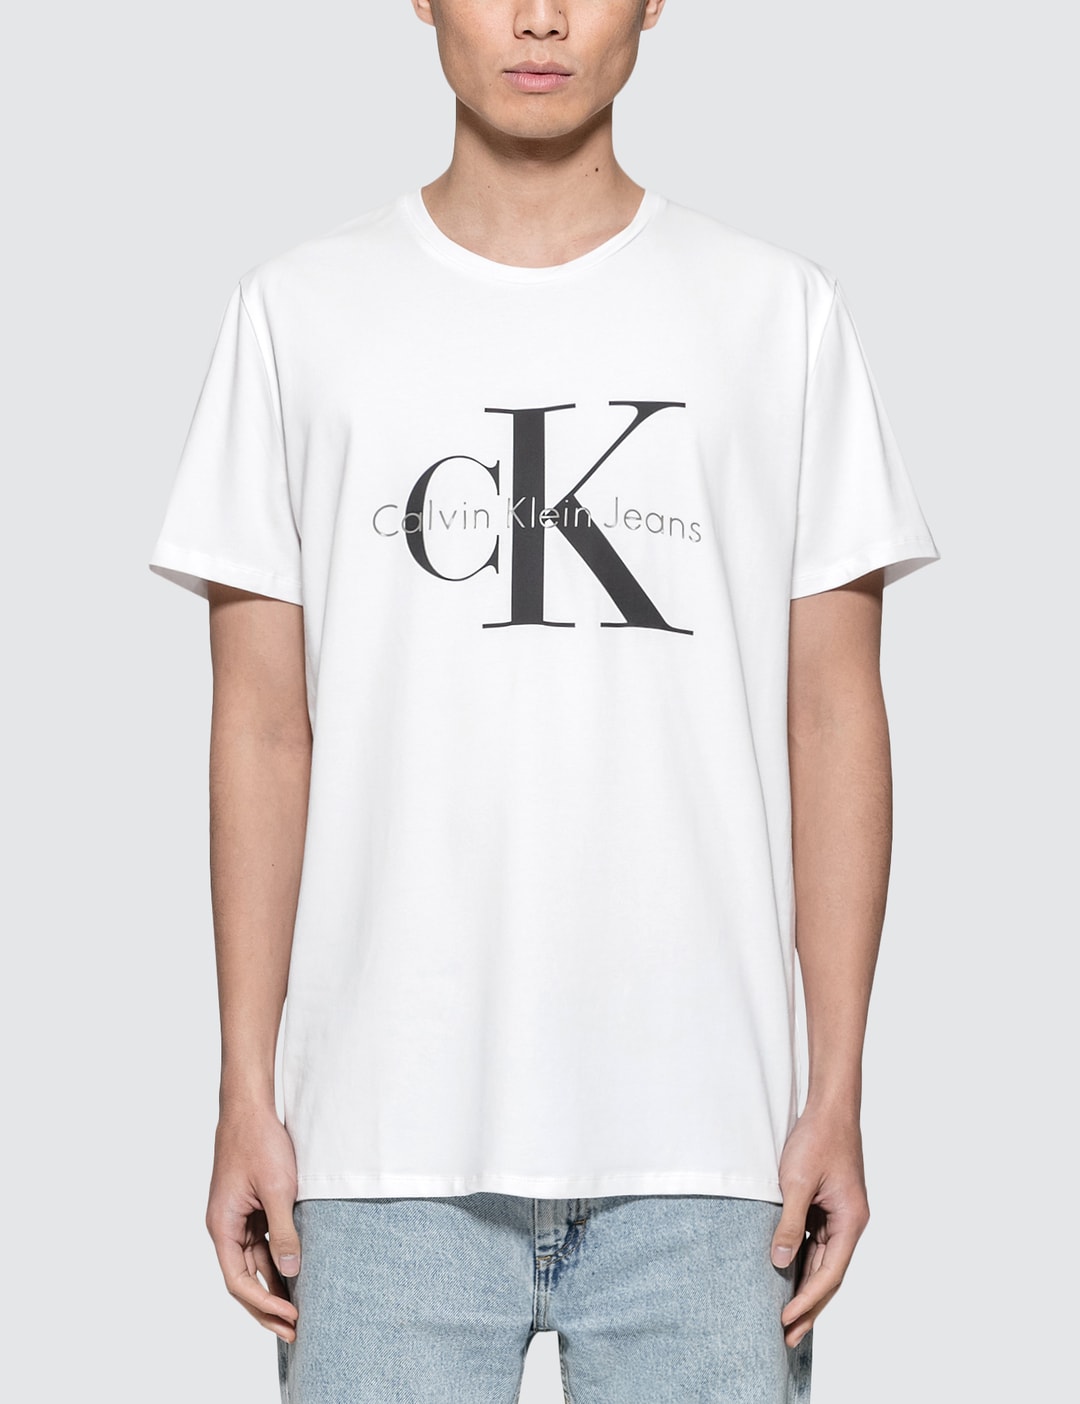 Calvin Klein Jeans - CK T-Shirt S/S and HBX Fashion Lifestyle Globally - | by Logo Curated Slim Hypebeast